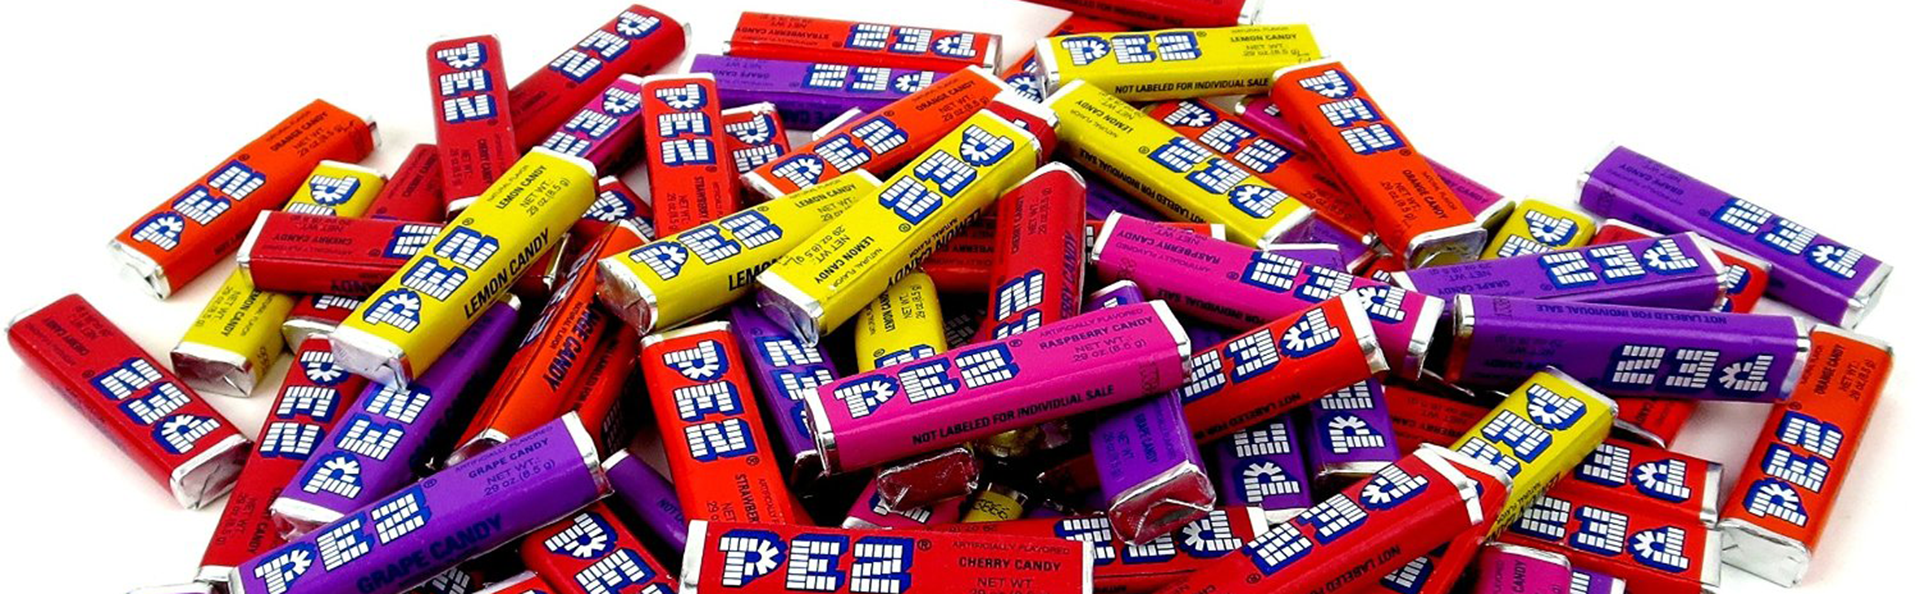 Pez Candy PNG - 62340